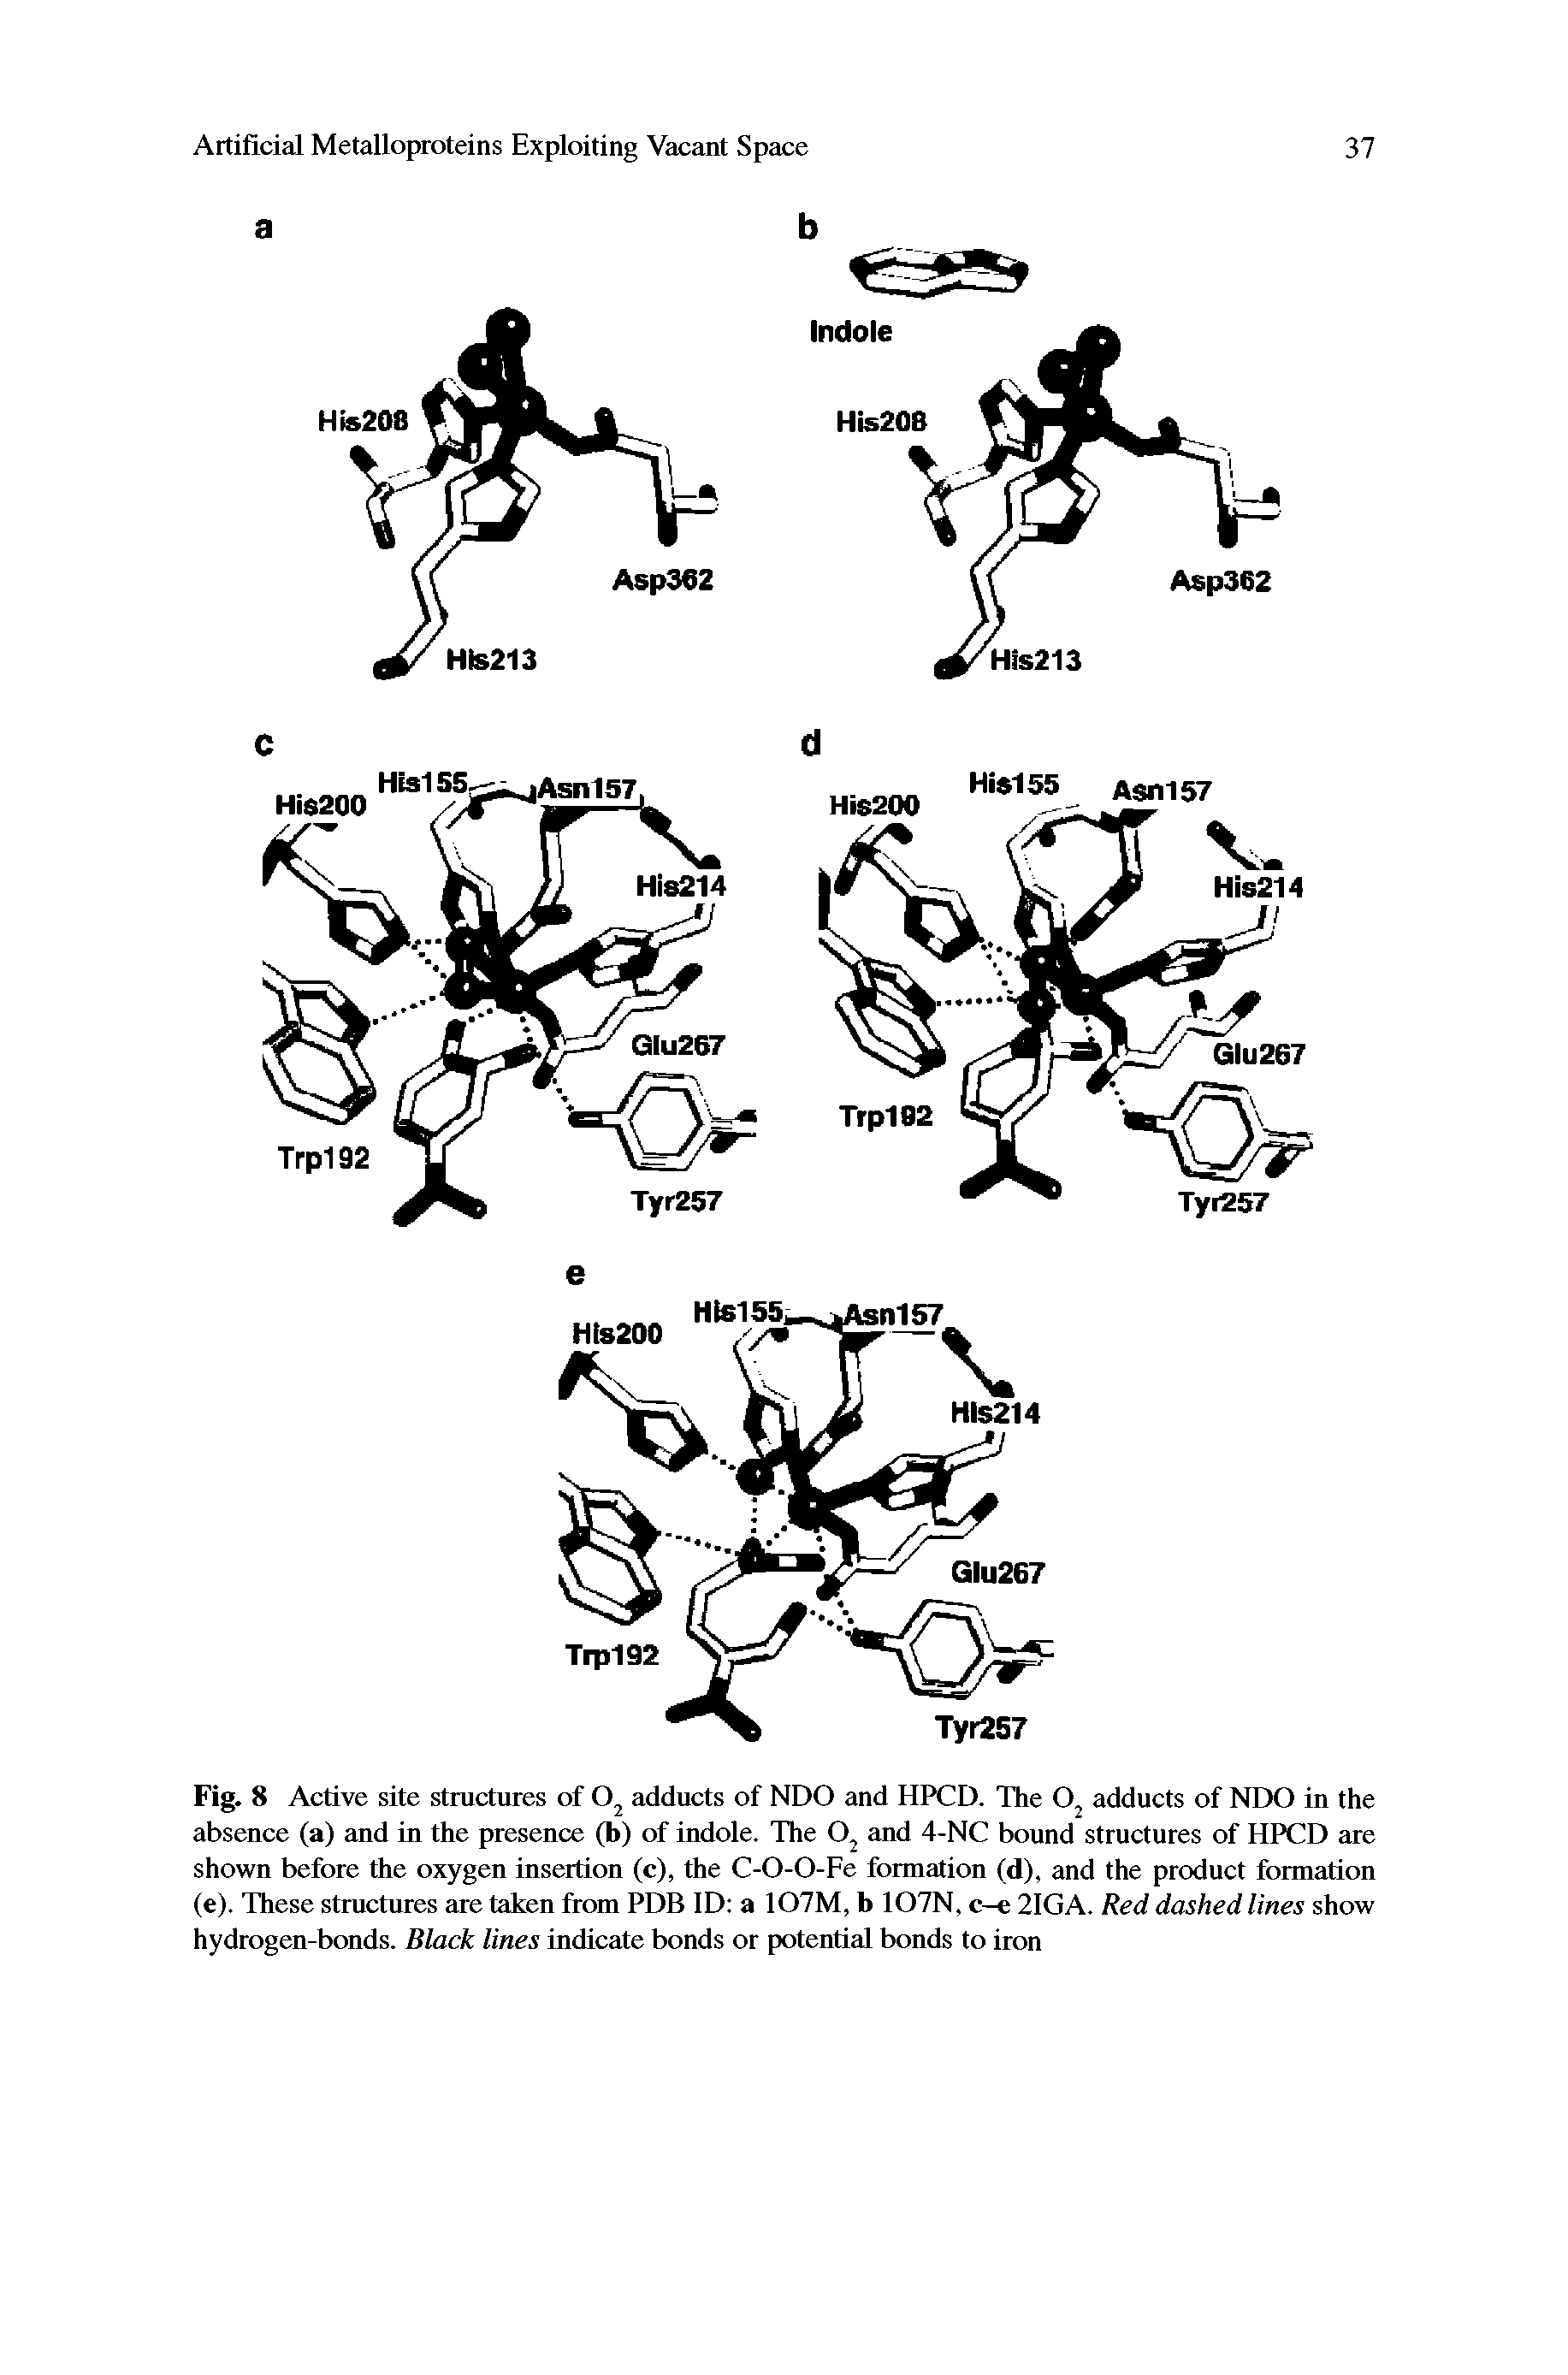 Fig. 8 Active site structures of adducts of NDO and HPCD. The adducts of NDO in the absence (a) and in the presence (b) of indole. The and 4-NC bound structures of HPCD are shown before the oxygen insertion (c), the C-O-O-Fe formation (d), and the product formation (e). These structures are taken from PDB ID a 107M, b 107N, c-e 2IGA. Red dashed lines show hydrogen-bonds. Black lines indicate bonds or potential bonds to iron...